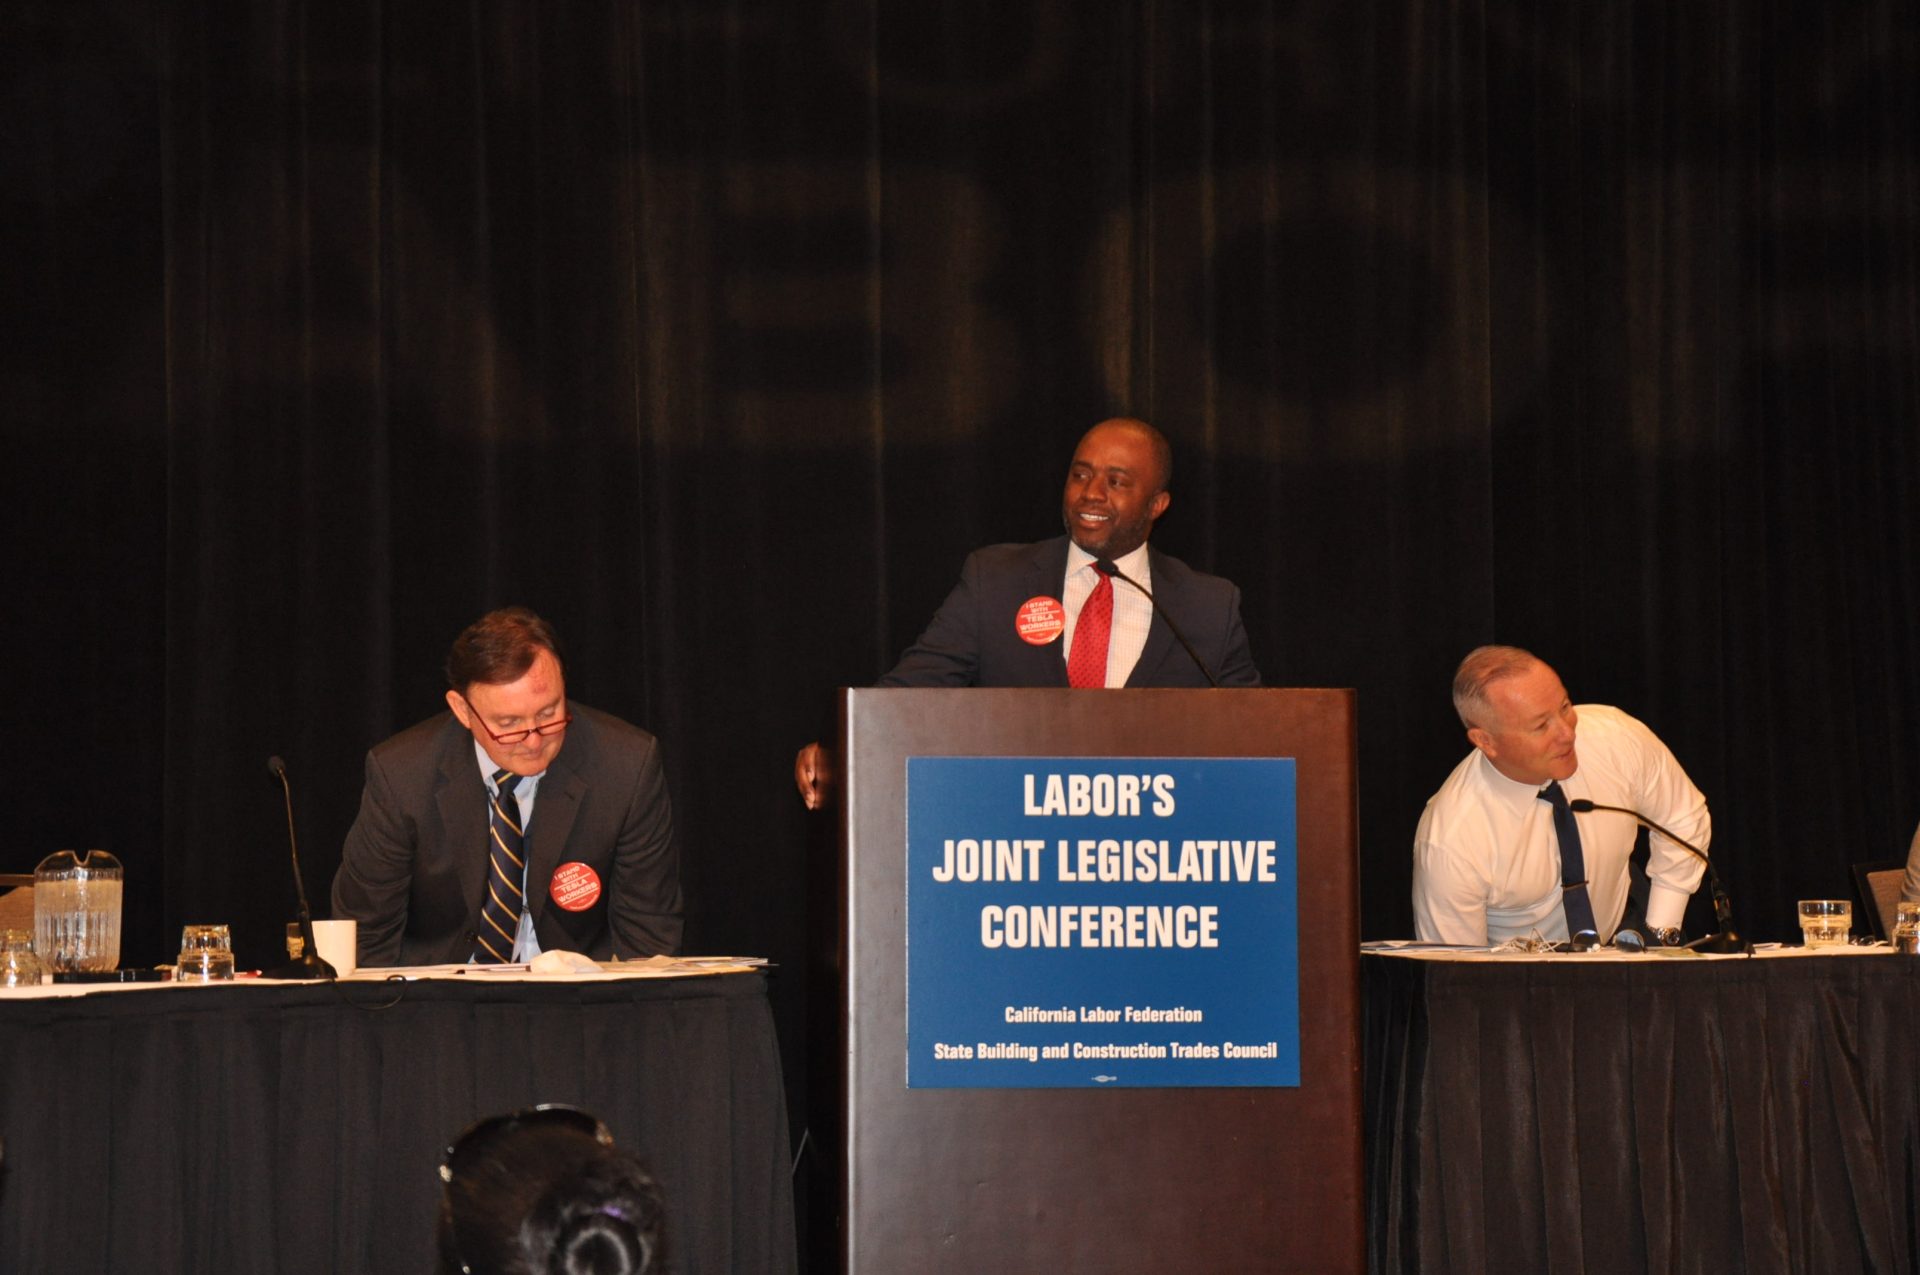 Image from the Gallery: Labor’s Joint Legislative Conference – Sacramento, CA